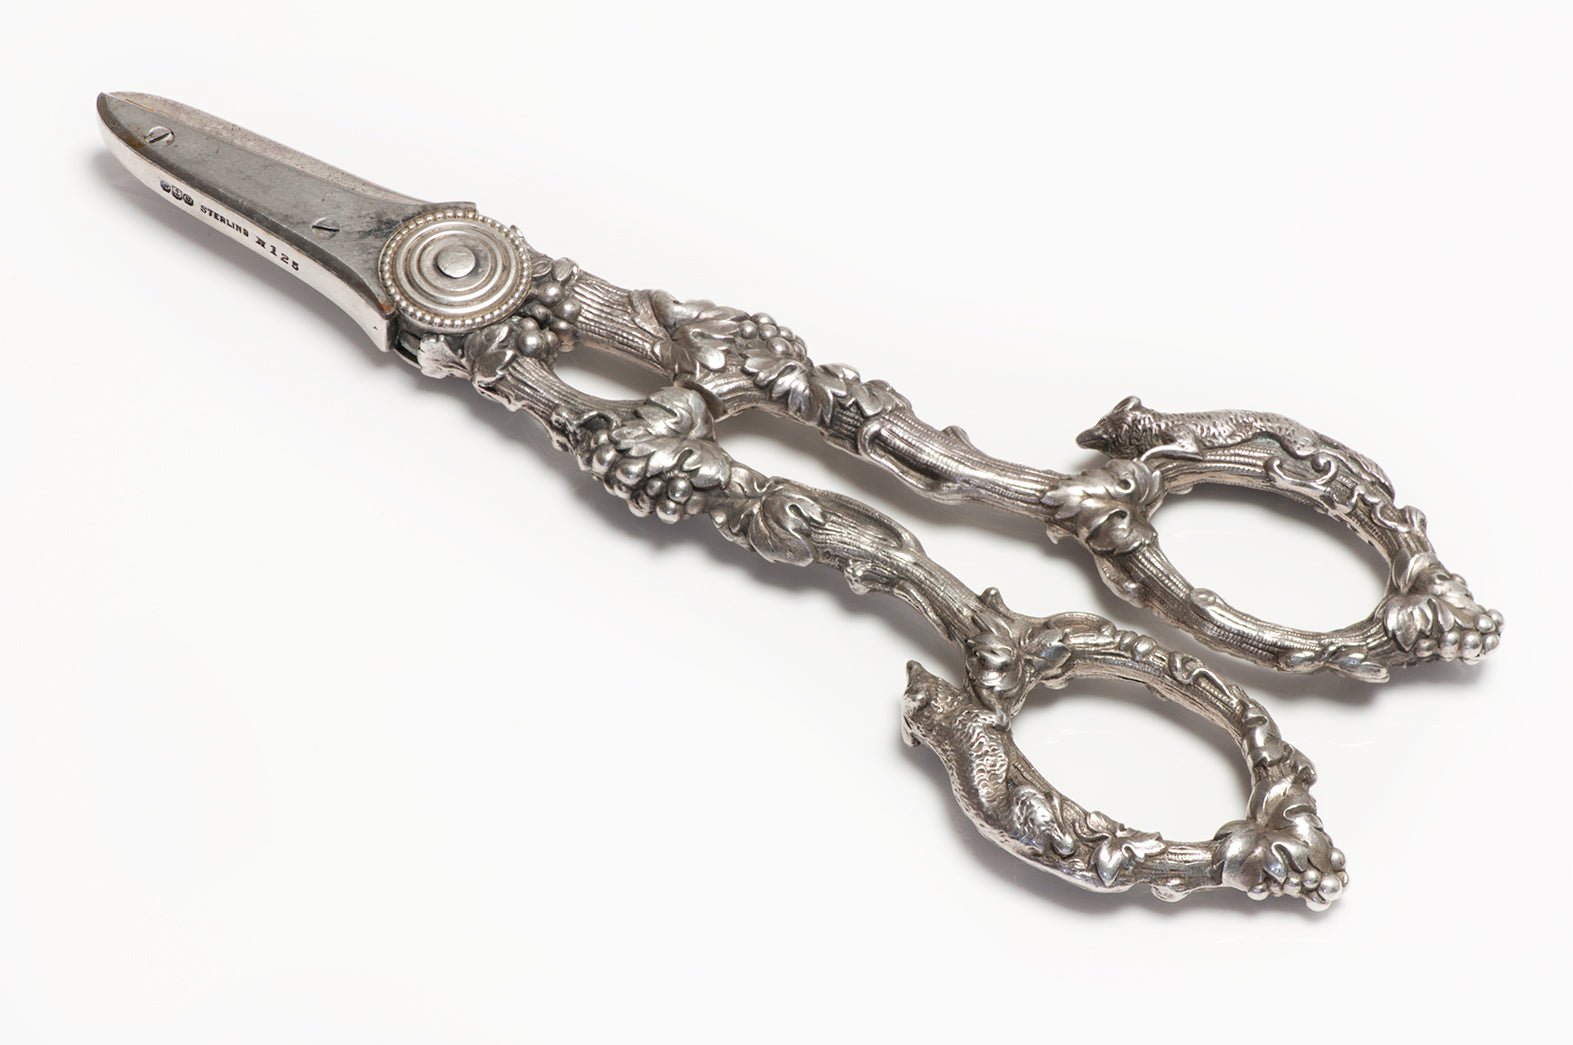 Antique Gorham Sterling Silver Grape Shears "Fox and Grape" Pattern